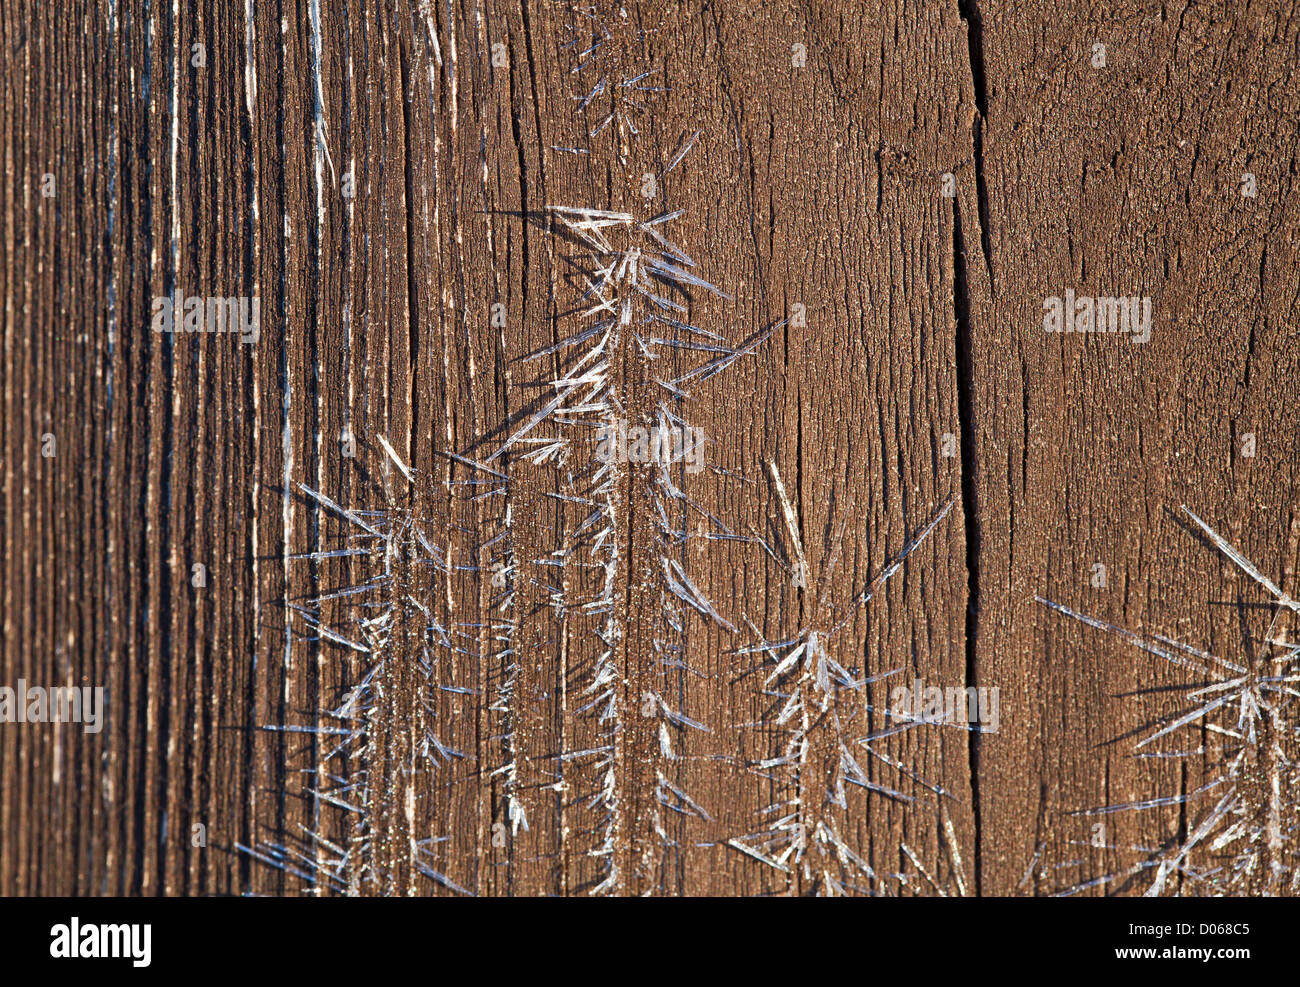 Shards of Frost on Shed Door Stock Photo